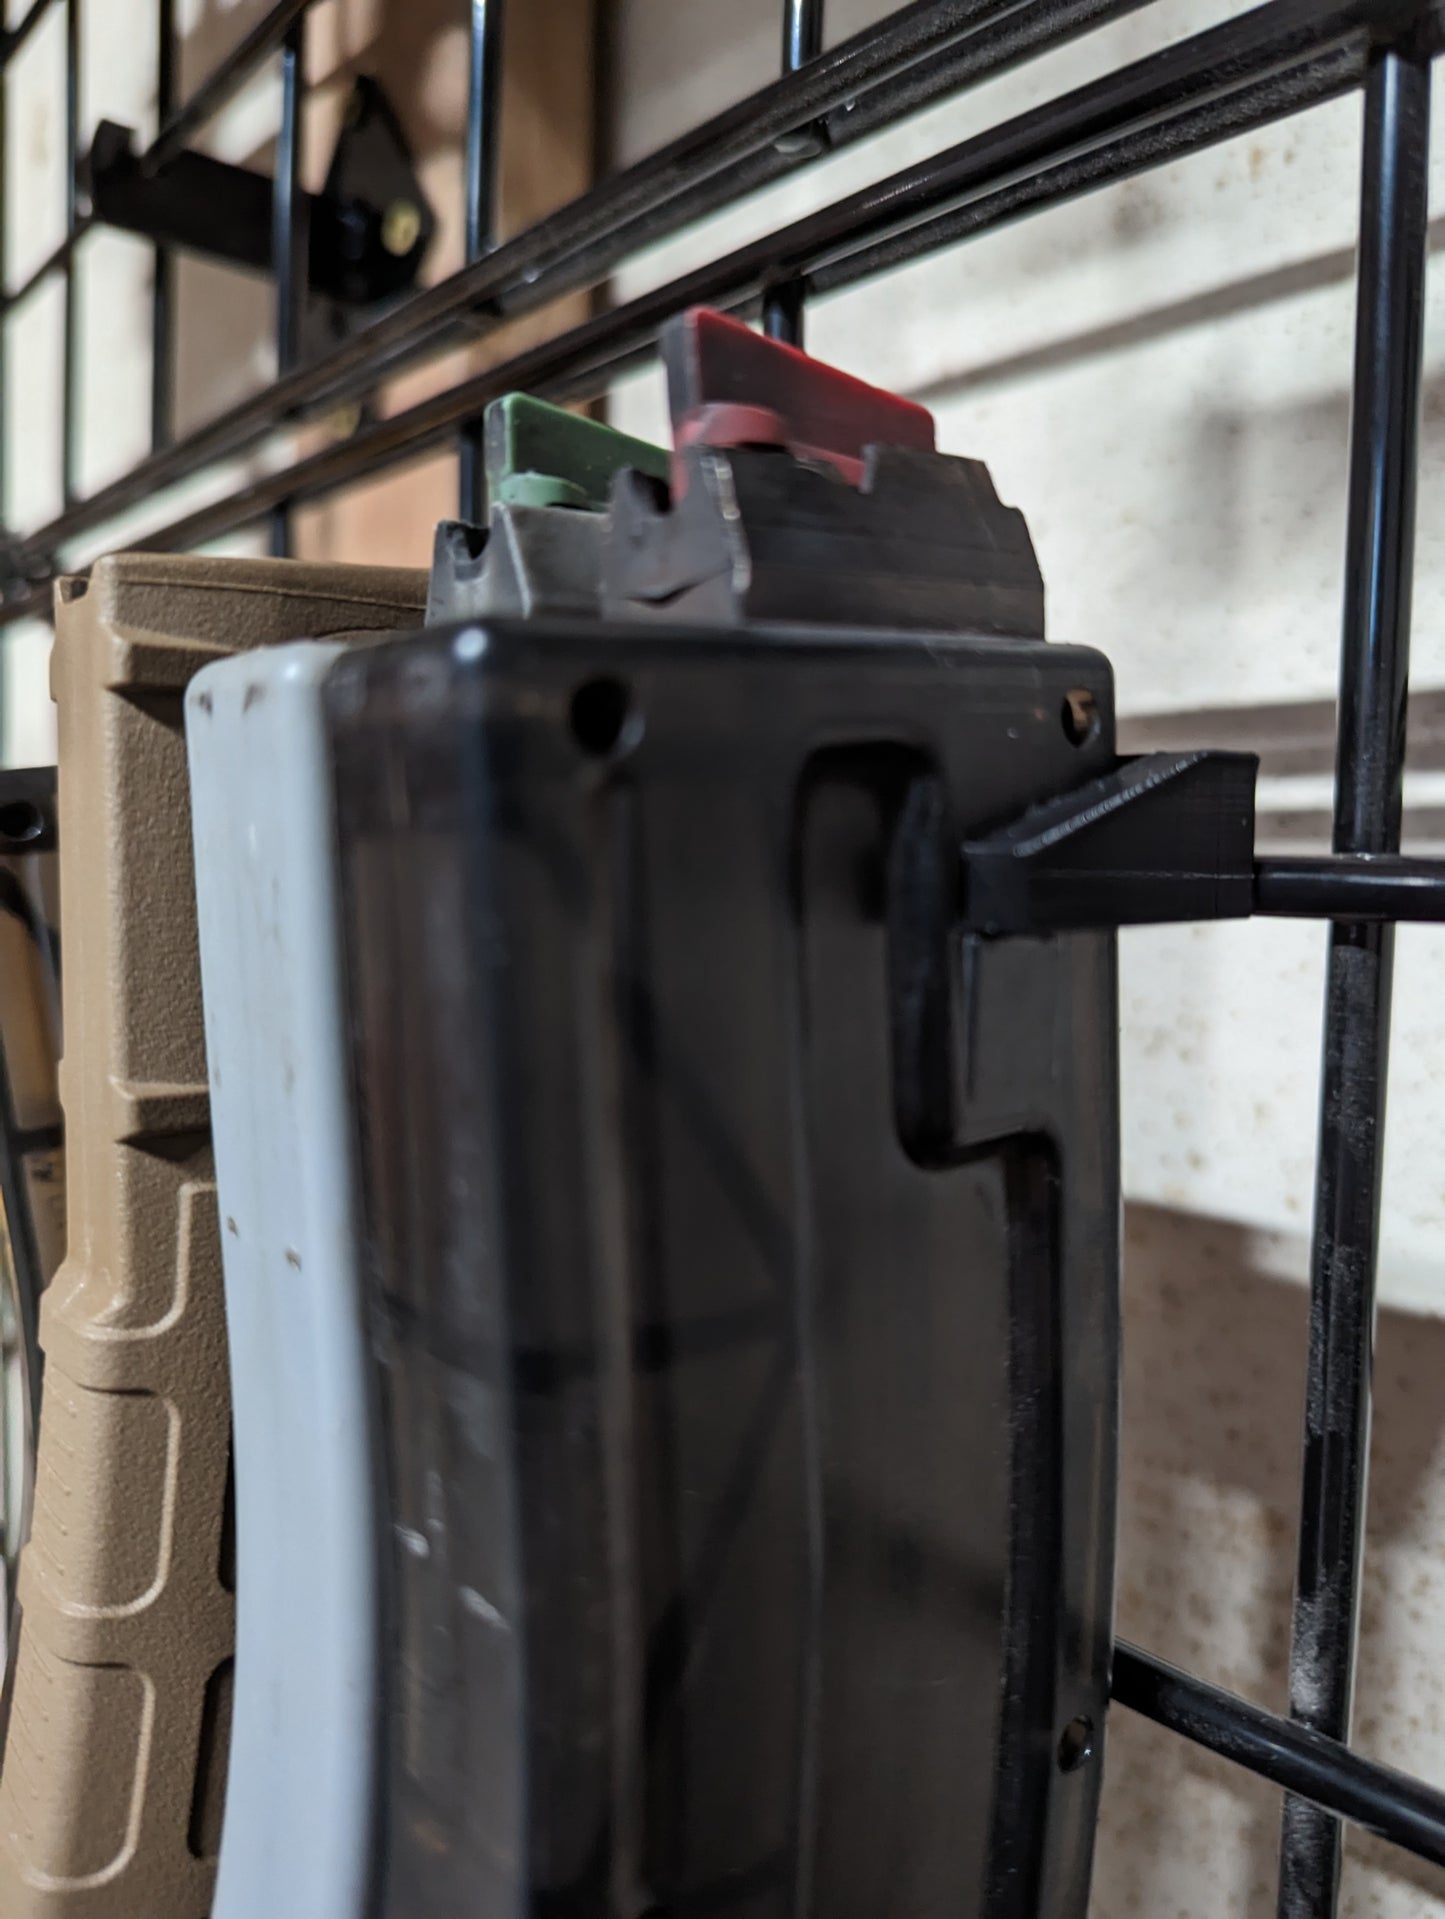 Mount for AR 15 Pattern Mags - Gridwall | Magazine Holder Storage Rack